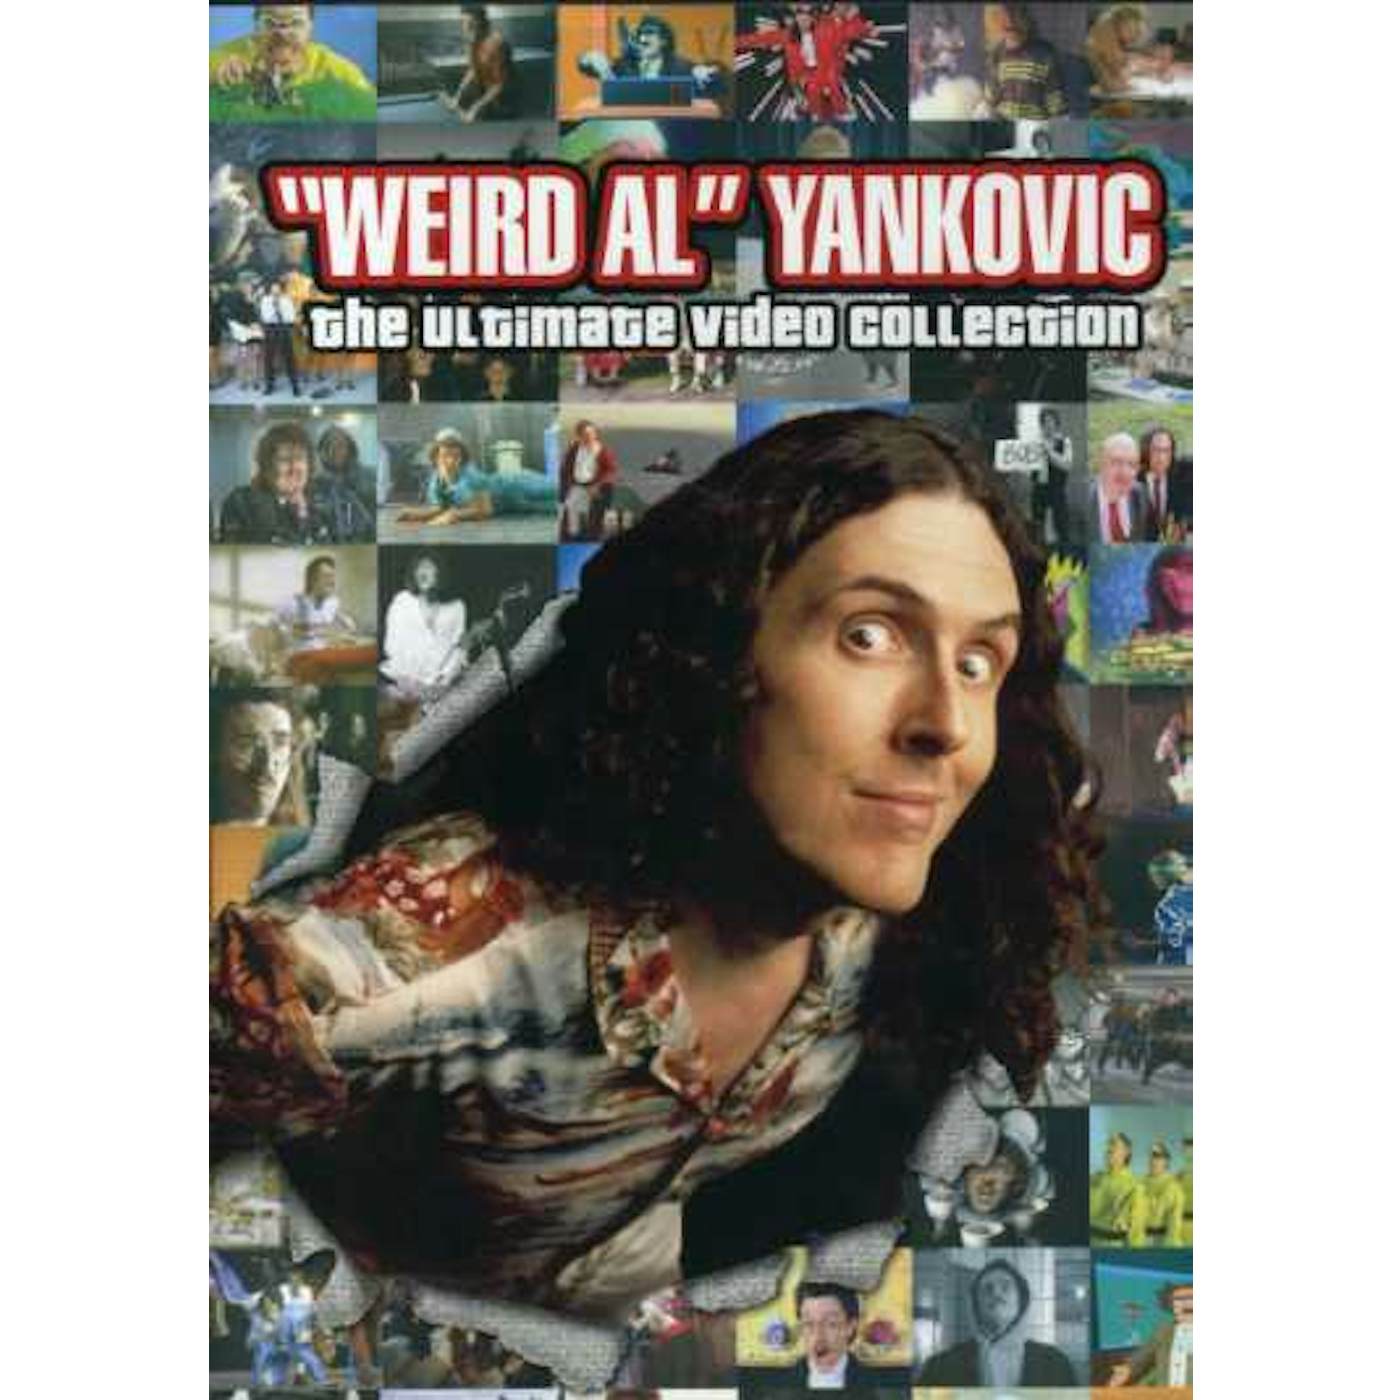 "Weird Al" Yankovic ULTIMATE VIDEO COLLECTION DVD